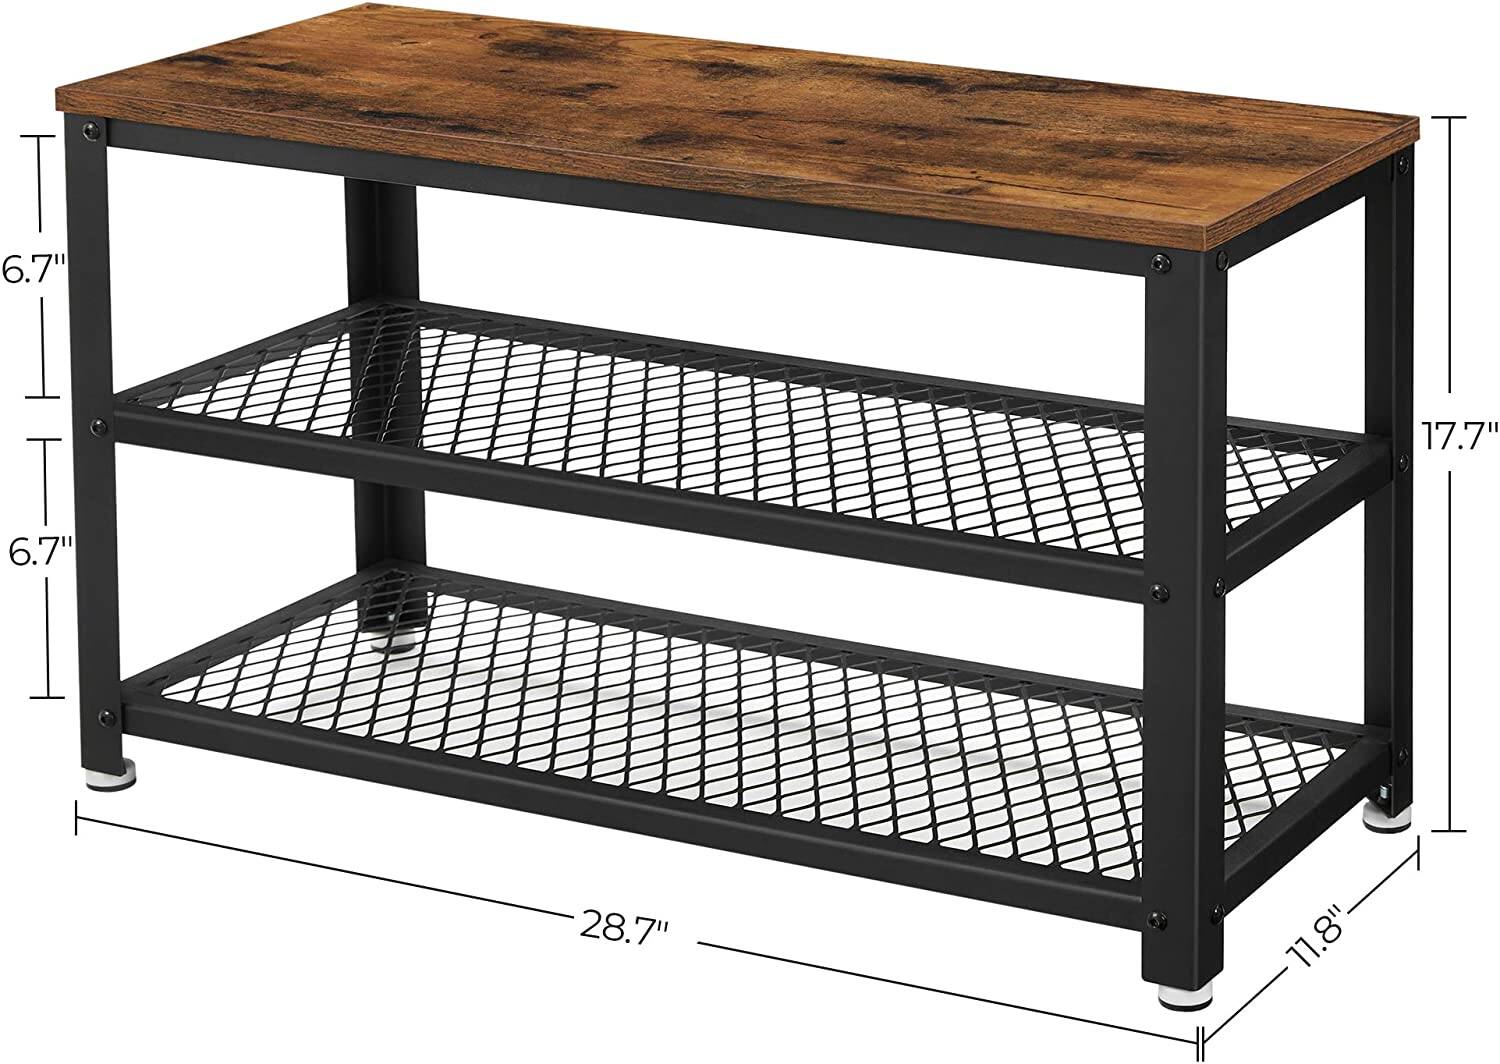 VASAGLE Shoe Rack & Shoe Bench made of Steel/Wood from $41.99 + Free Shipping